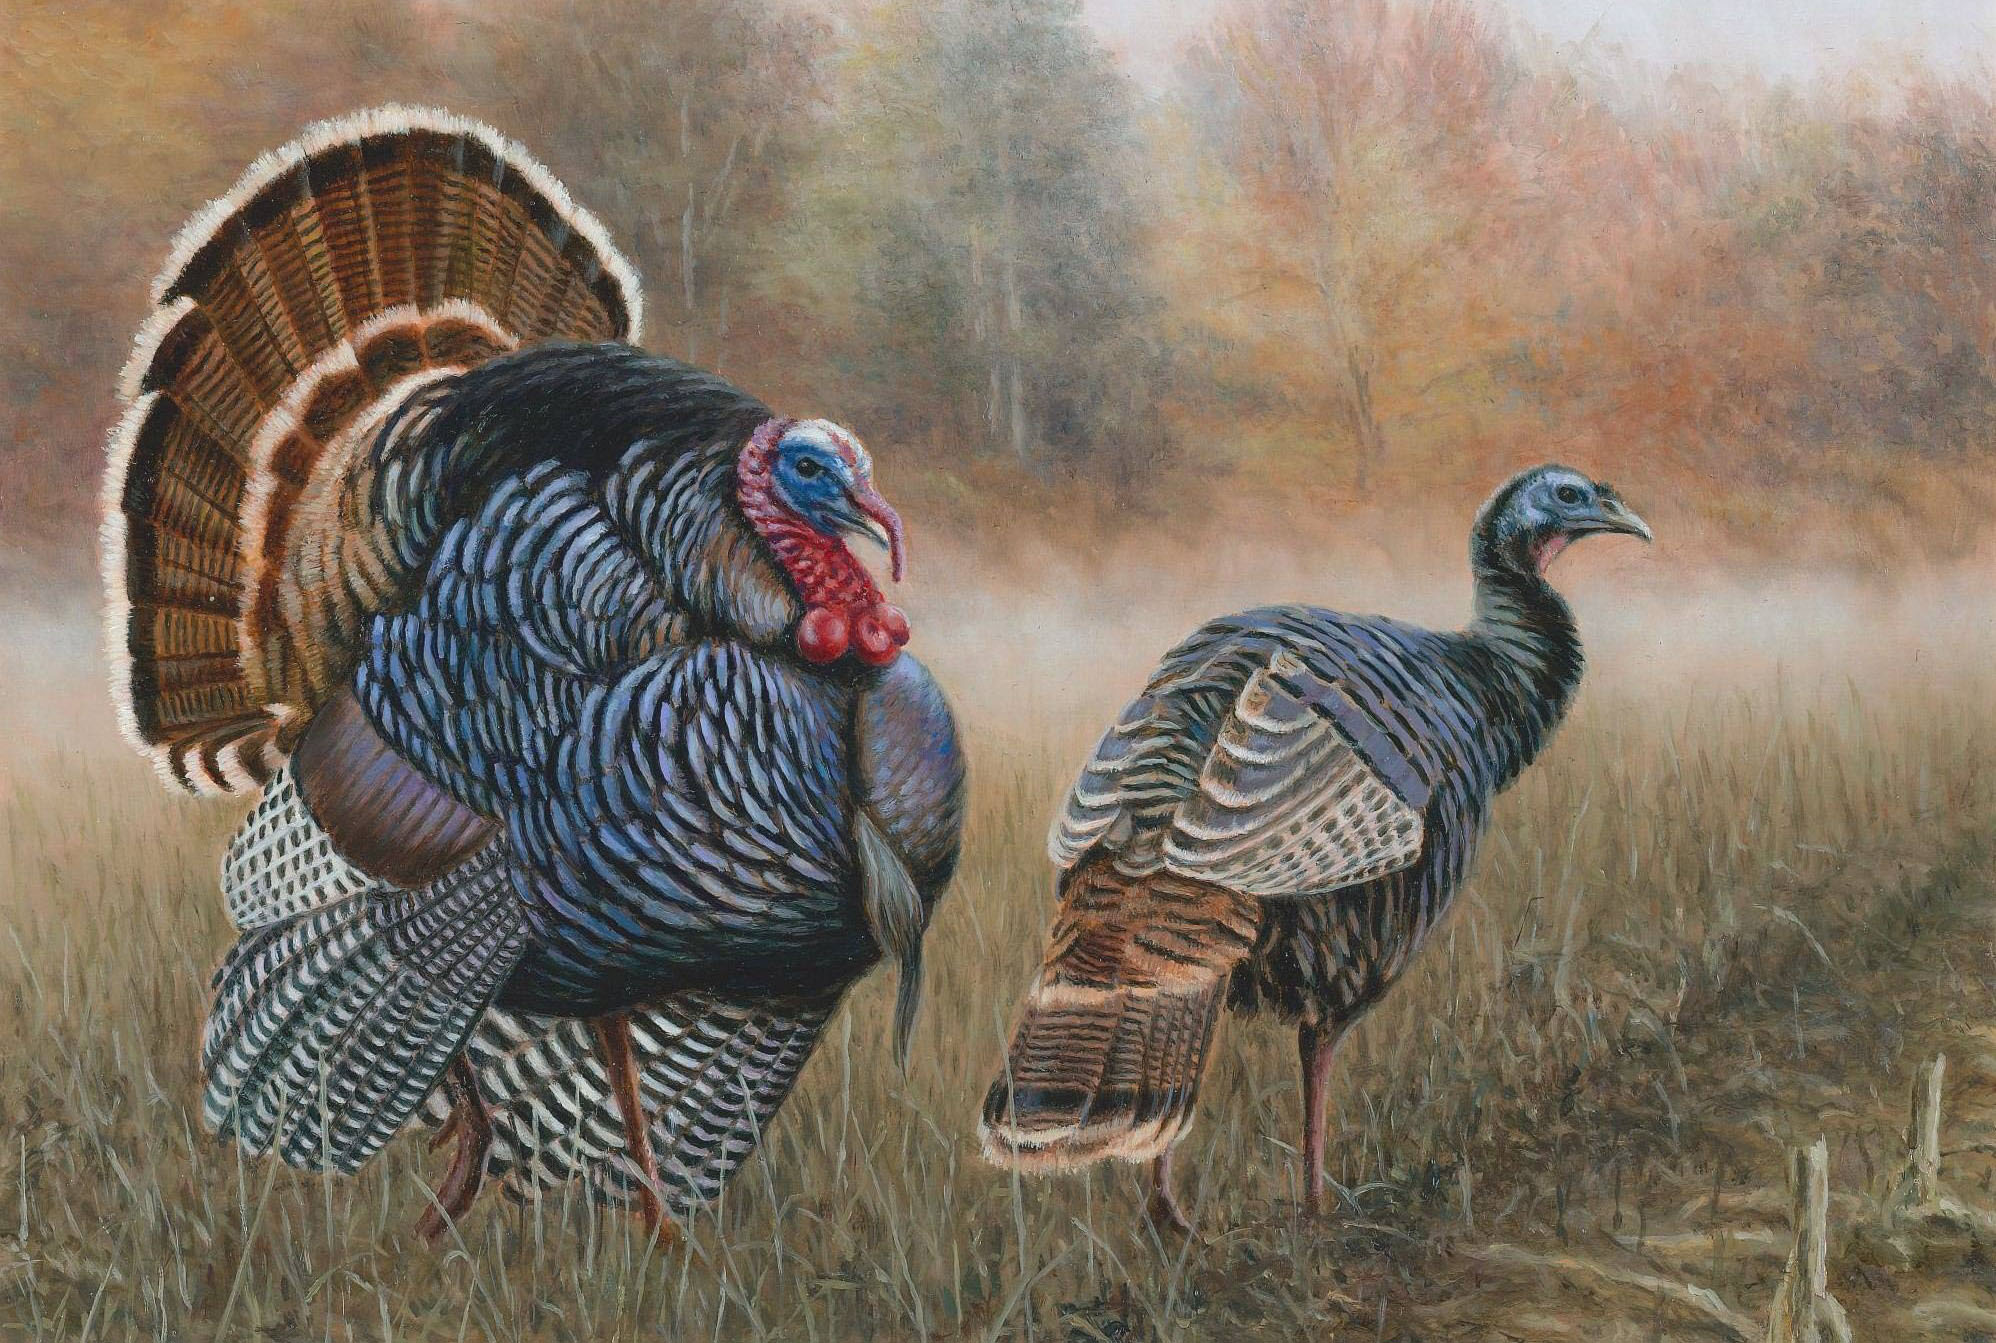 Brian Kuether is the Wisconsin Department of Natural Resources' winner of the 2020 pheasant and turkey stamp